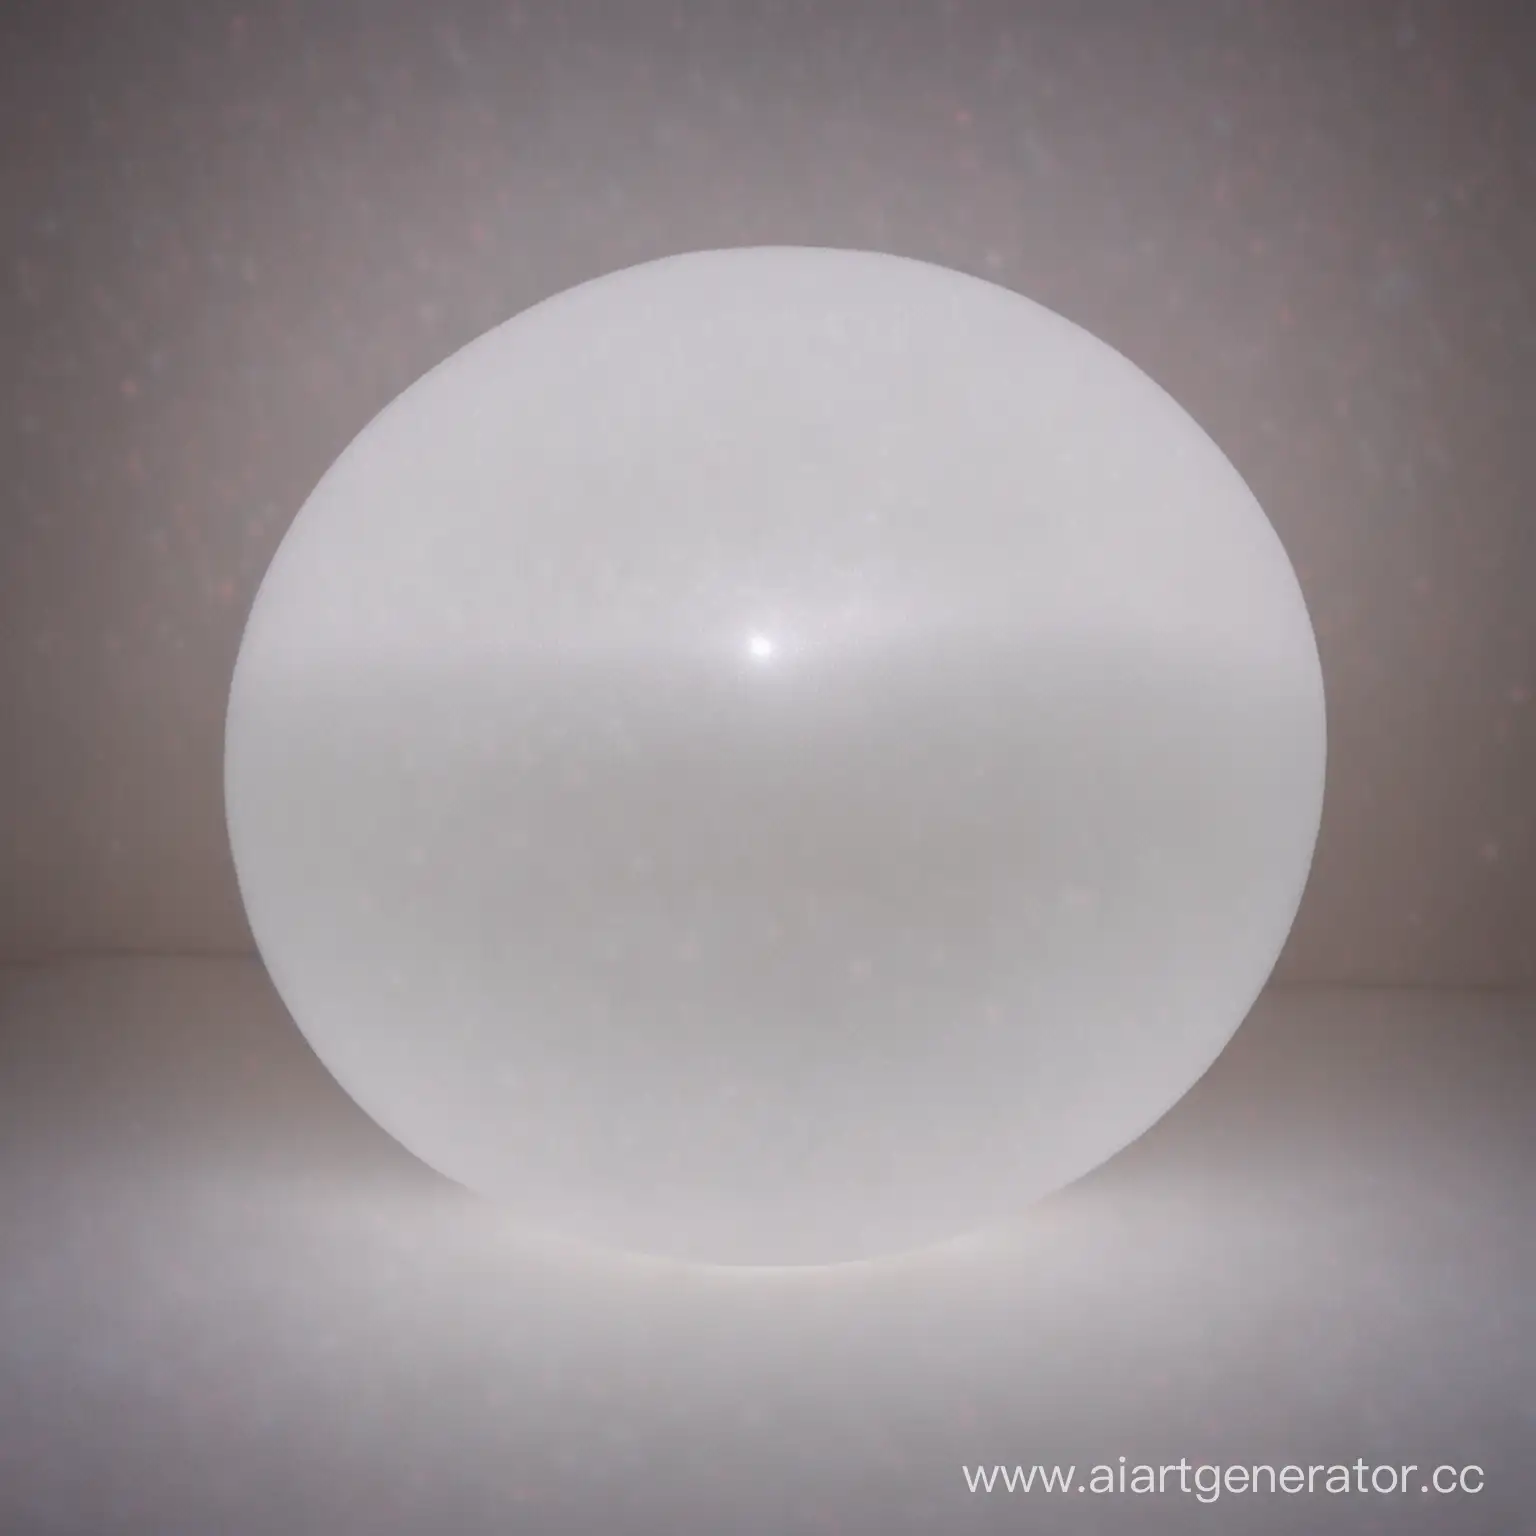 Enigmatic-White-Glowing-Orb-Suspended-in-Darkness